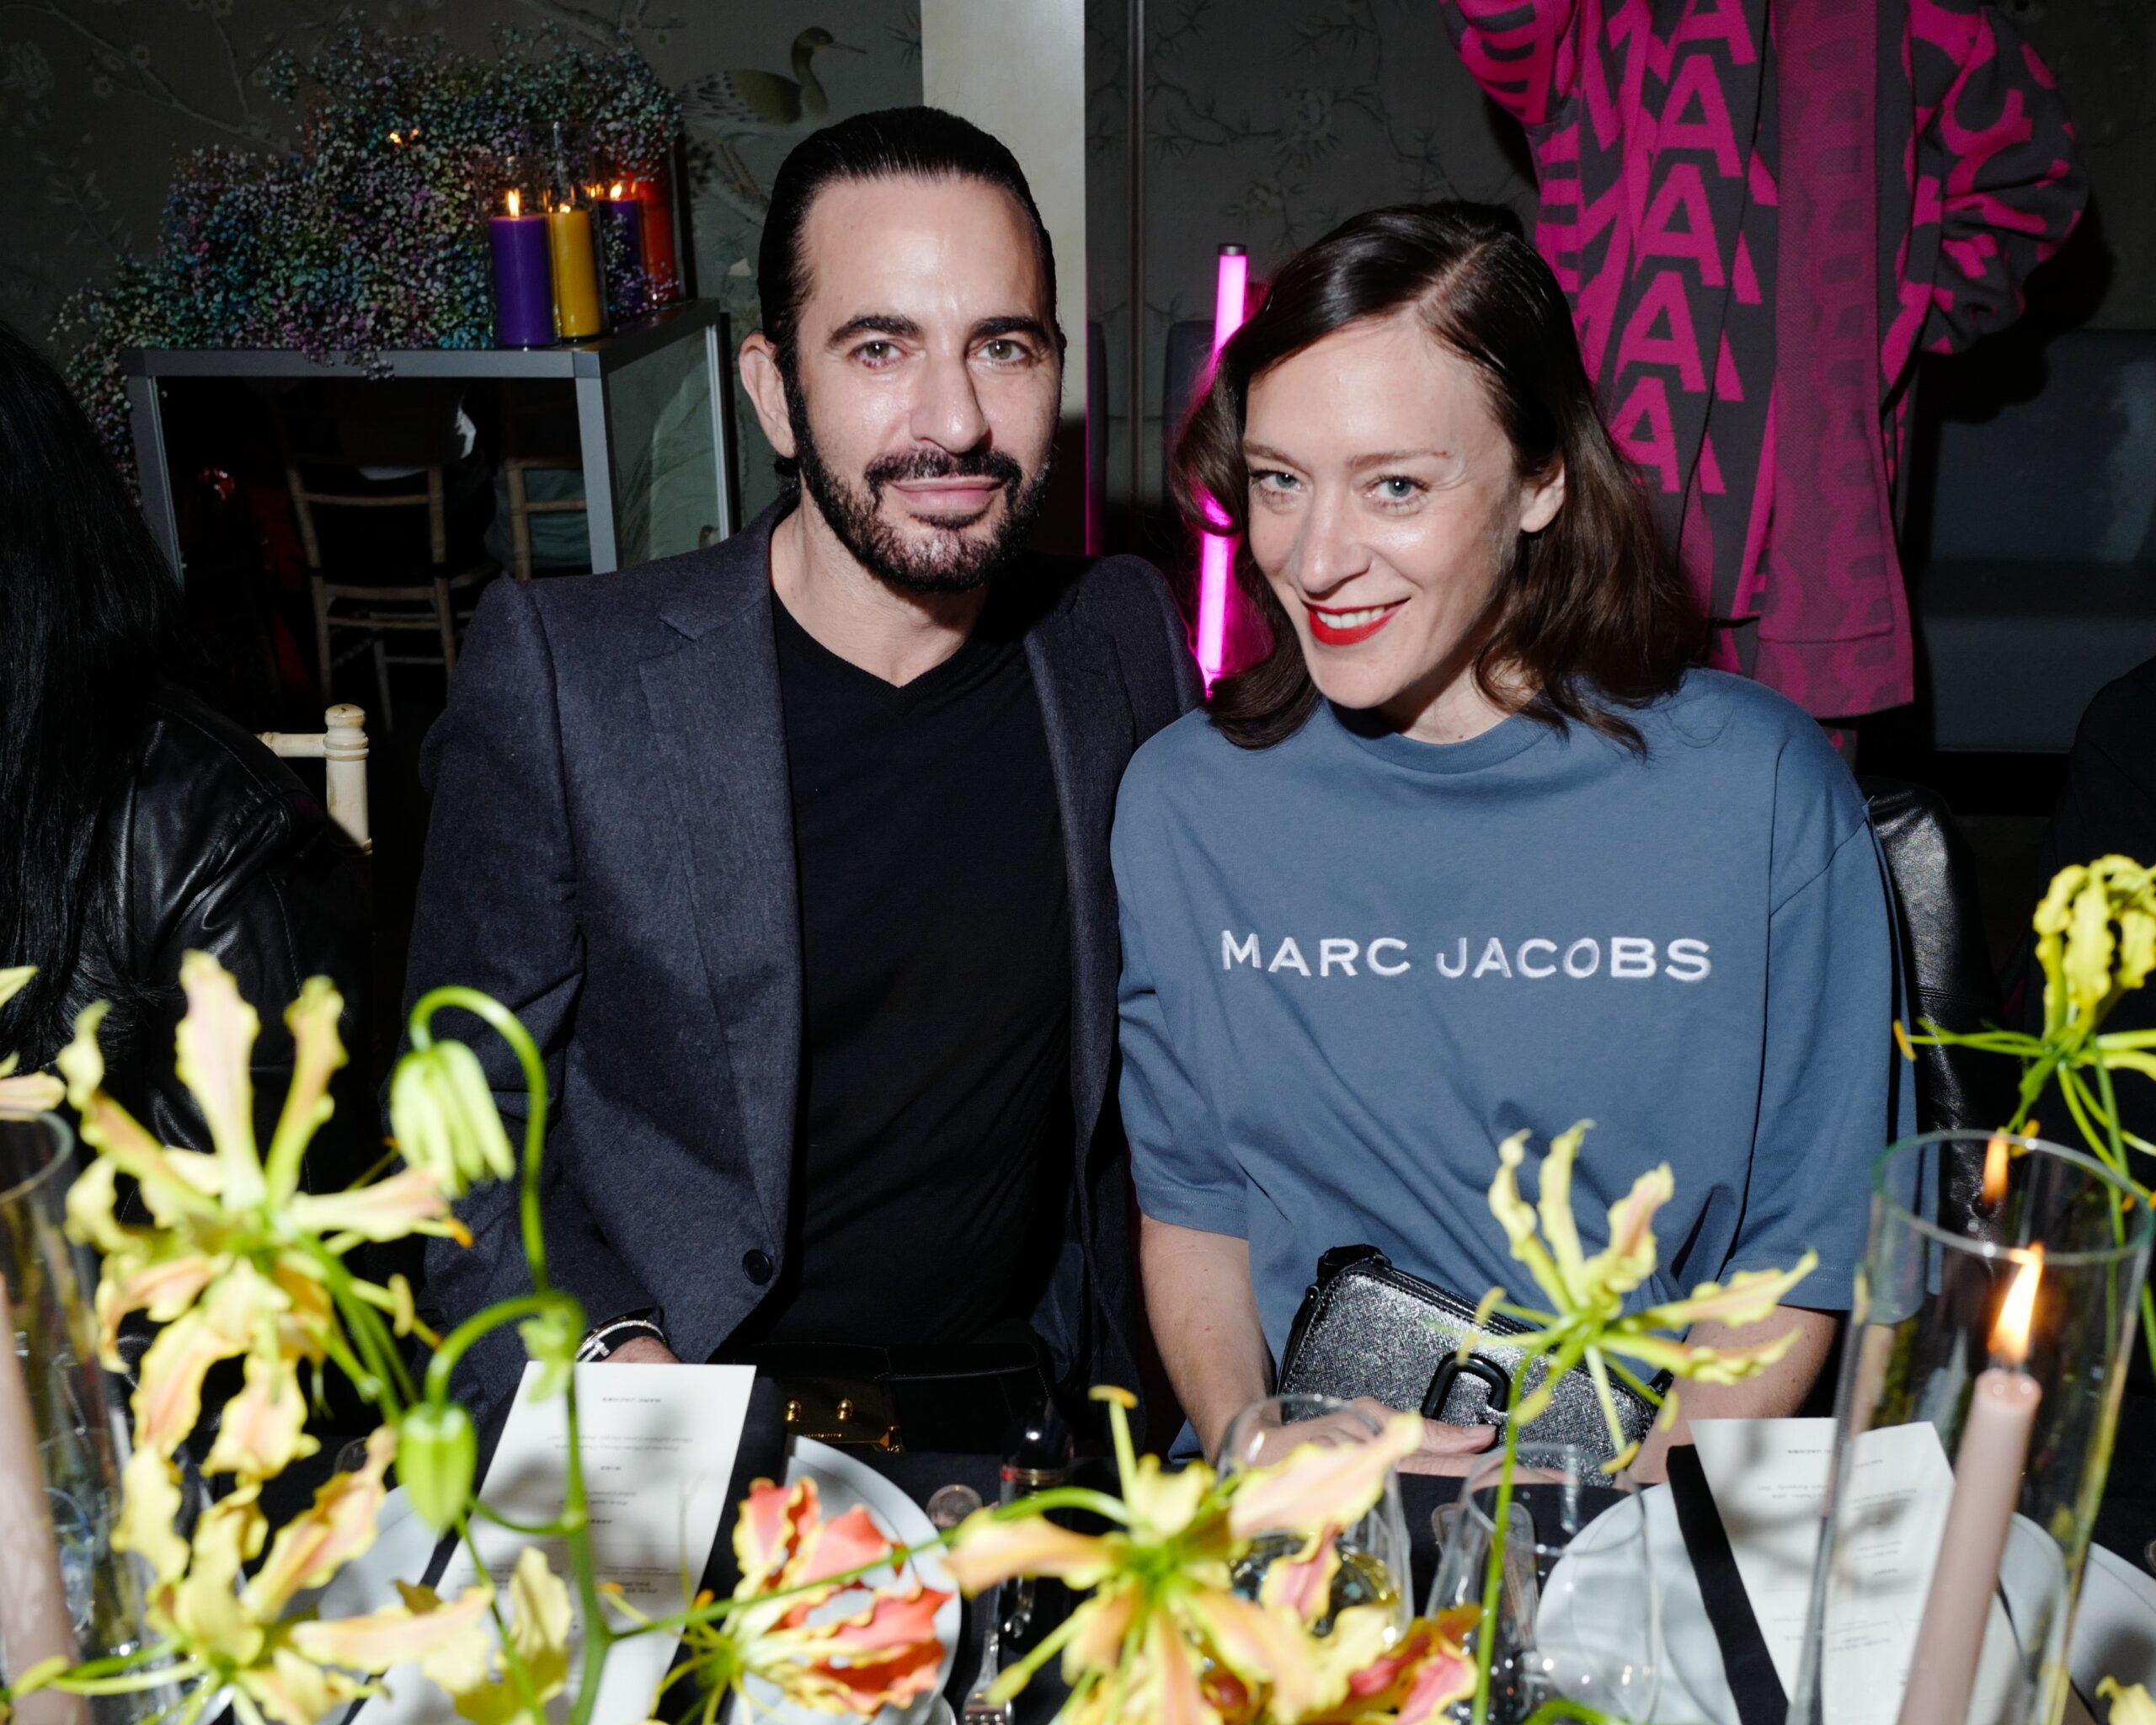 Marc Jacobs Takes Over Bergdorf Goodman for an After-Sad Expertise